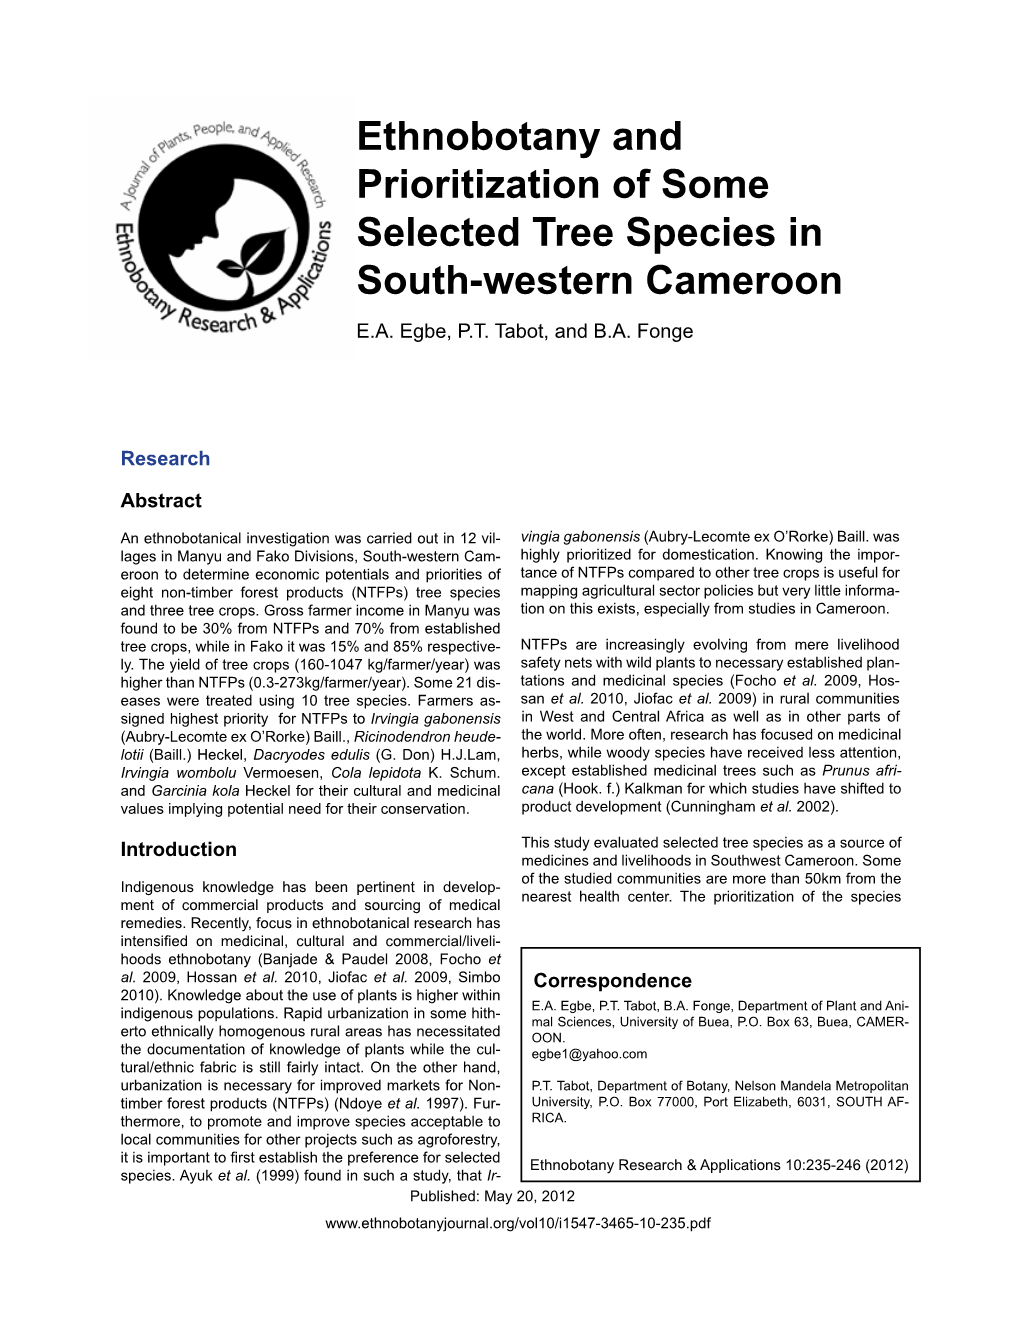 Ethnobotany and Prioritization of Some Selected Tree Species in South-Western Cameroon E.A